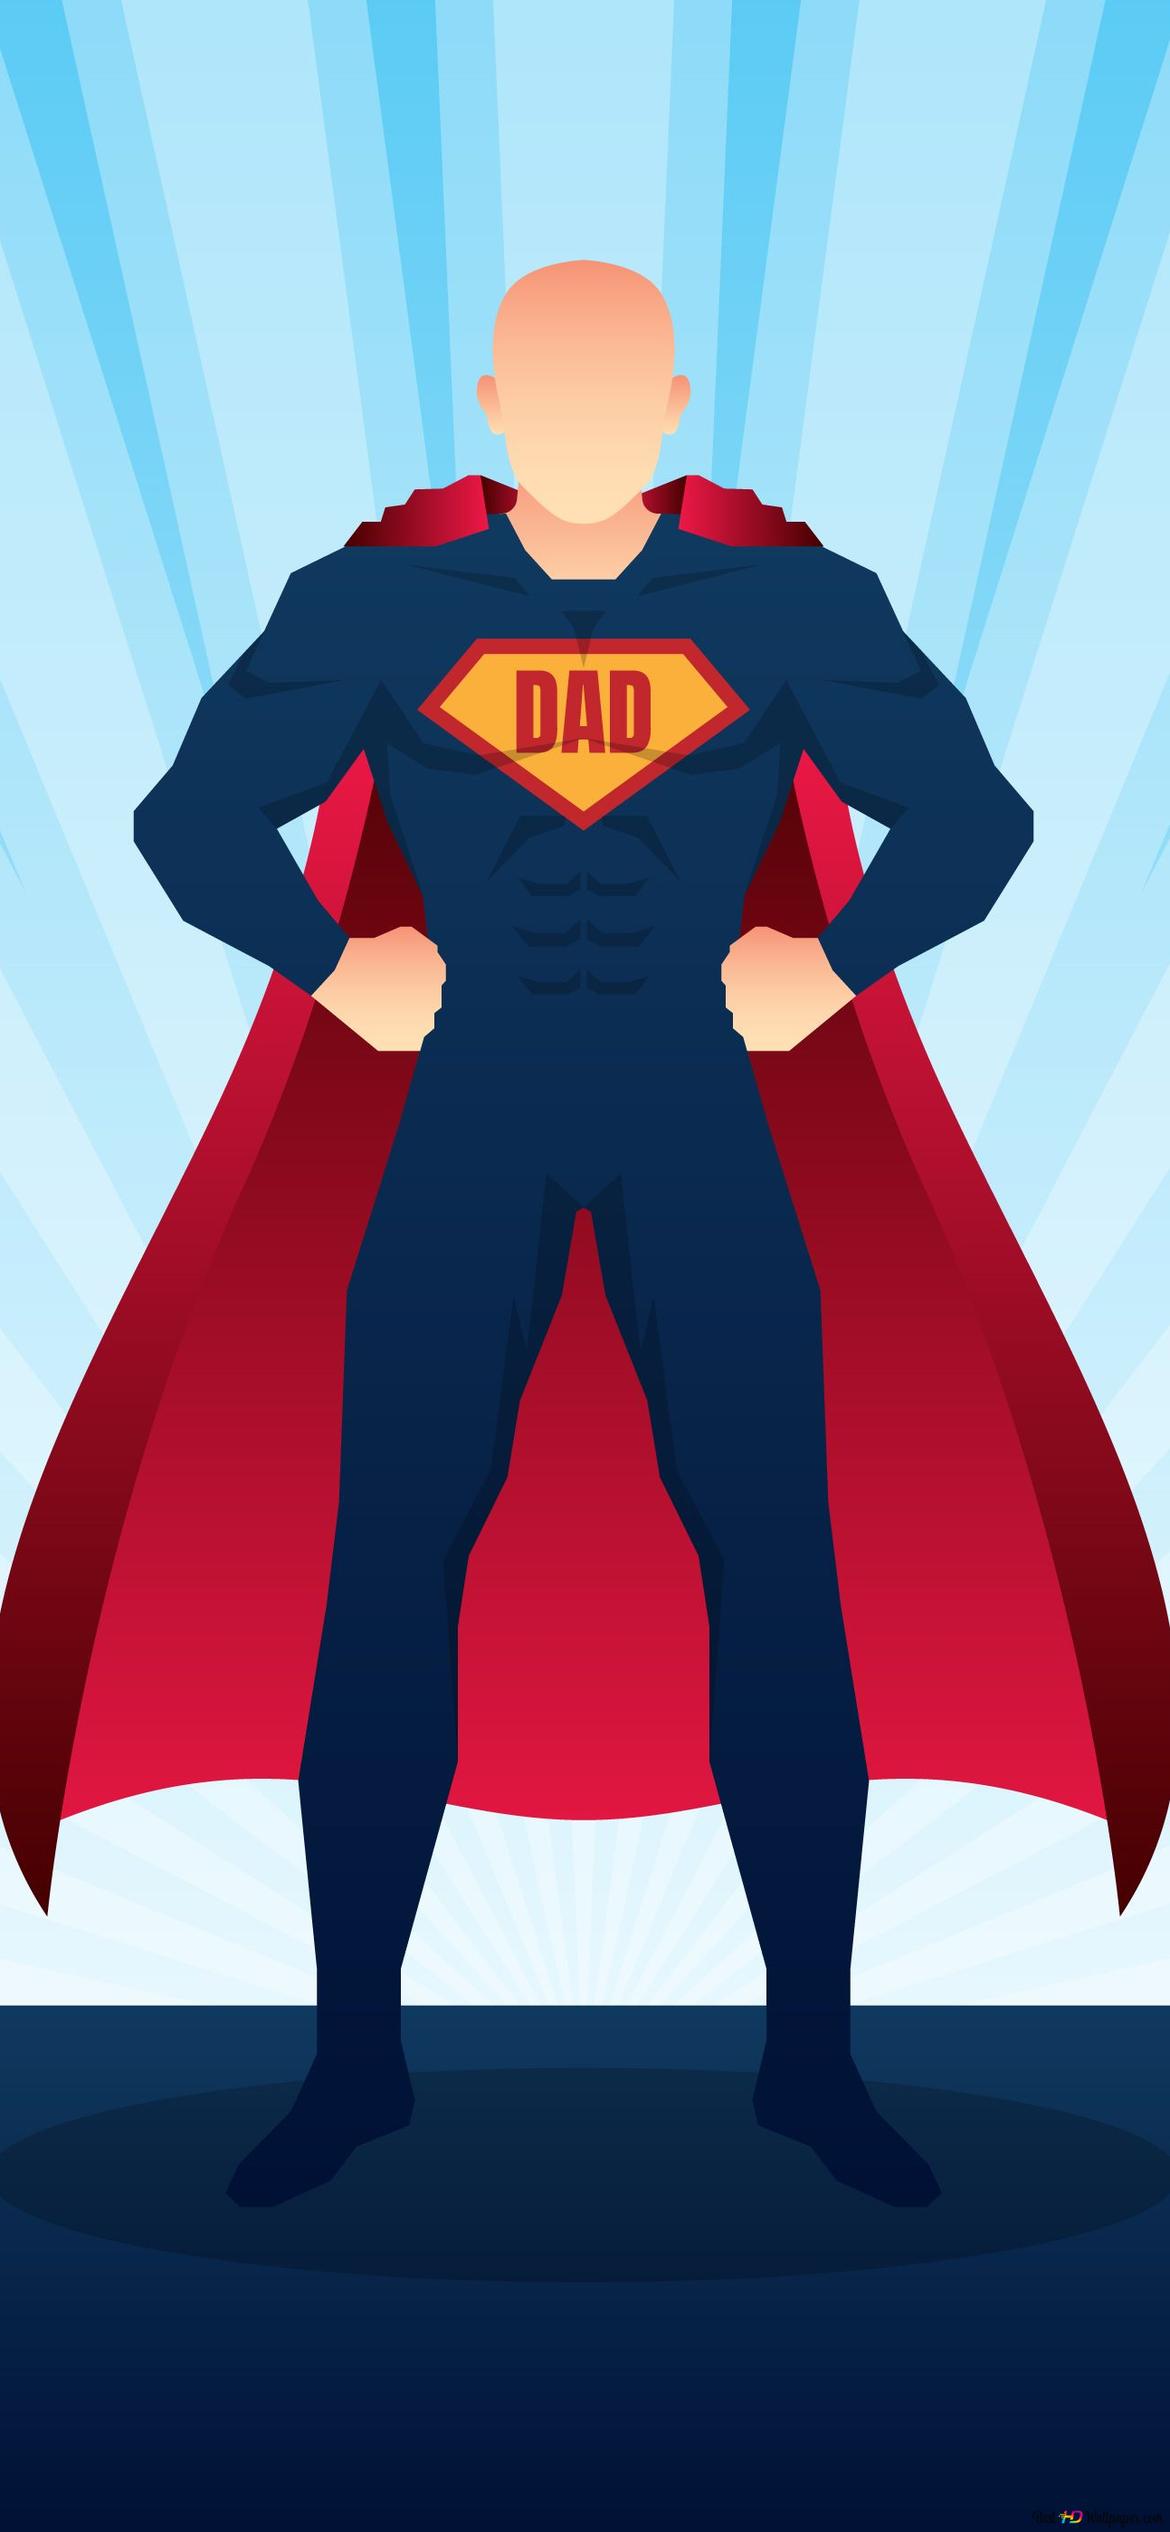 Fathers day themed father figure in red cape and blue superhero outfit k wallpaper download